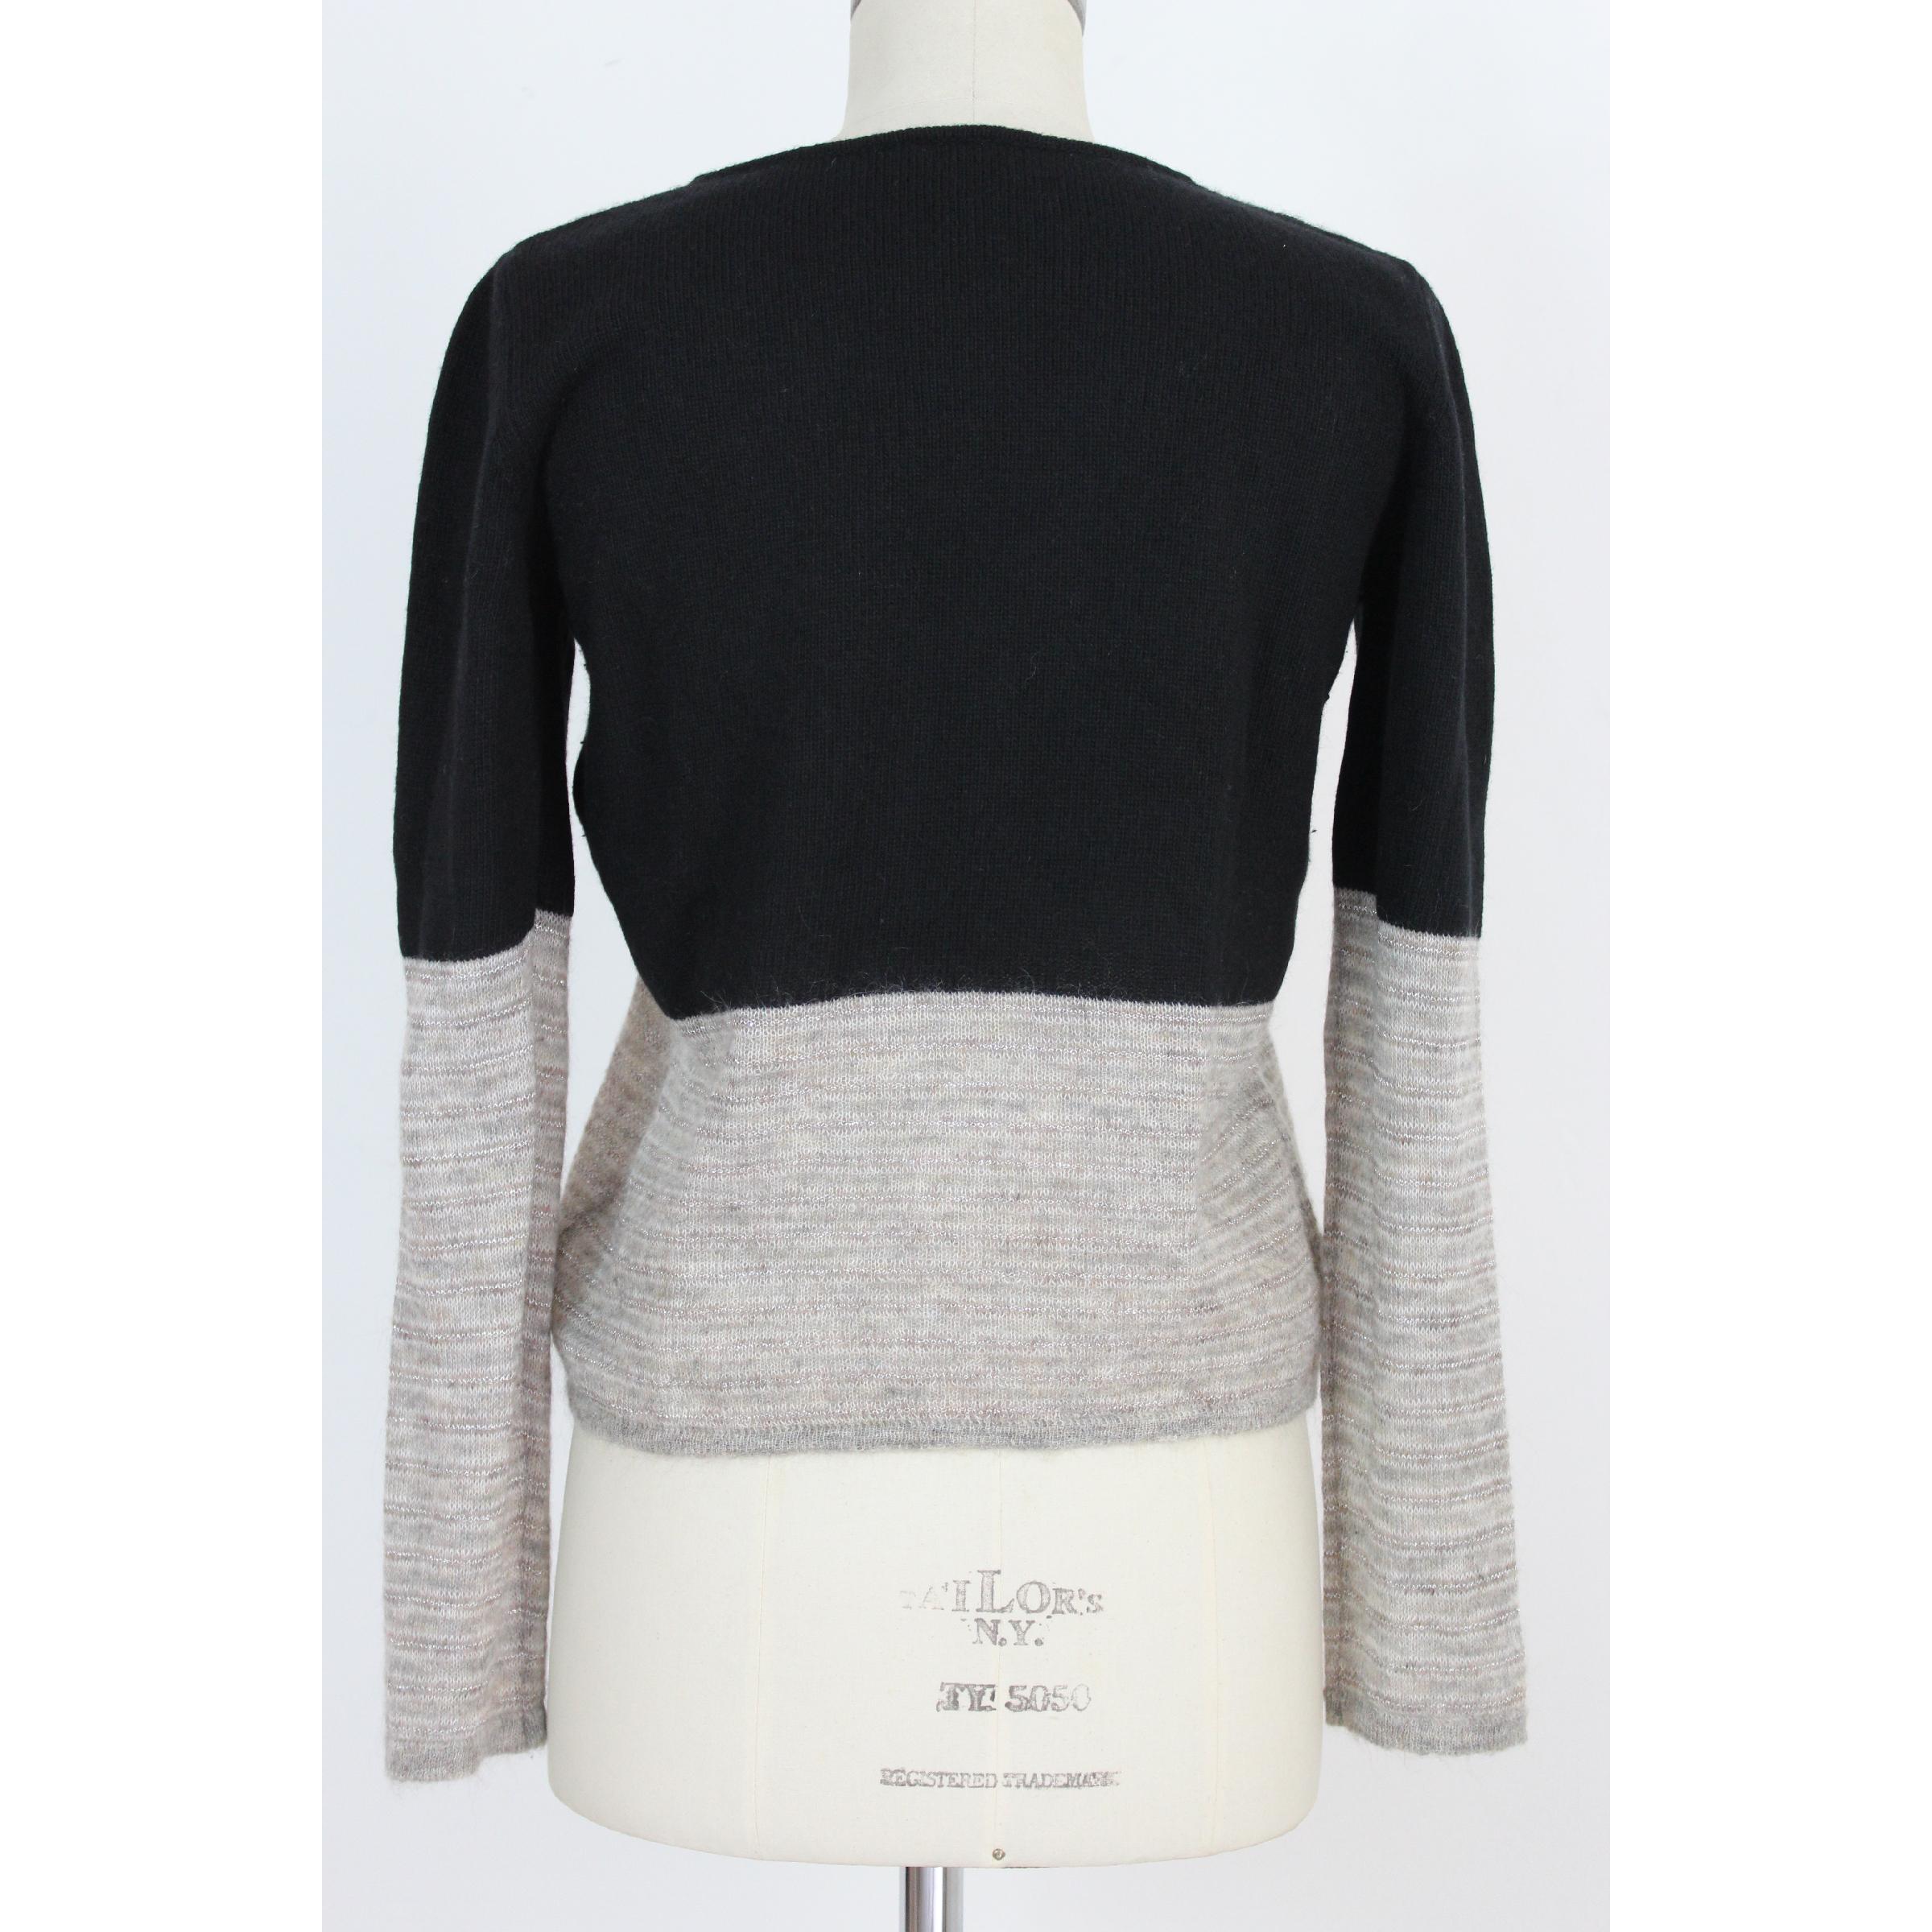 Krizia e Poi woman vintage 80s sweater. Black and gray color with laminated threads, crew neck, 28% wool 18% viscose 12% cashmere 24% polyamide 15% mohair 3% cupro. Made in Italy. Excellent vintage condition. 

Size: 44 It 10 Us 12 uk 

Shoulder: 44